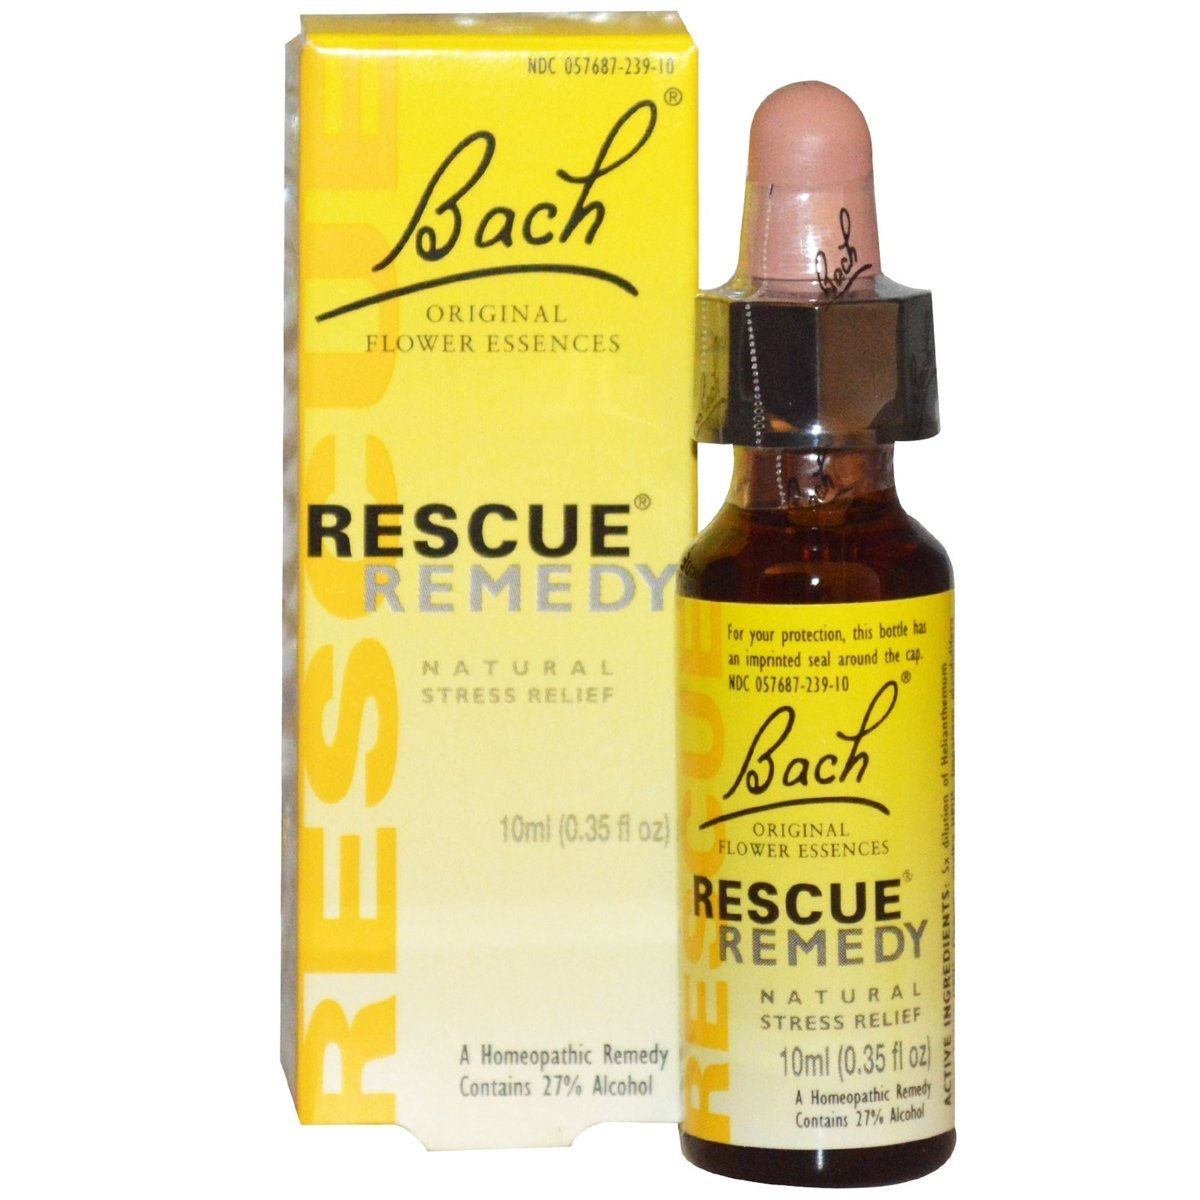 Rescue Remedy - Stress Remedy - Homeopathic Remedy - 10 ml